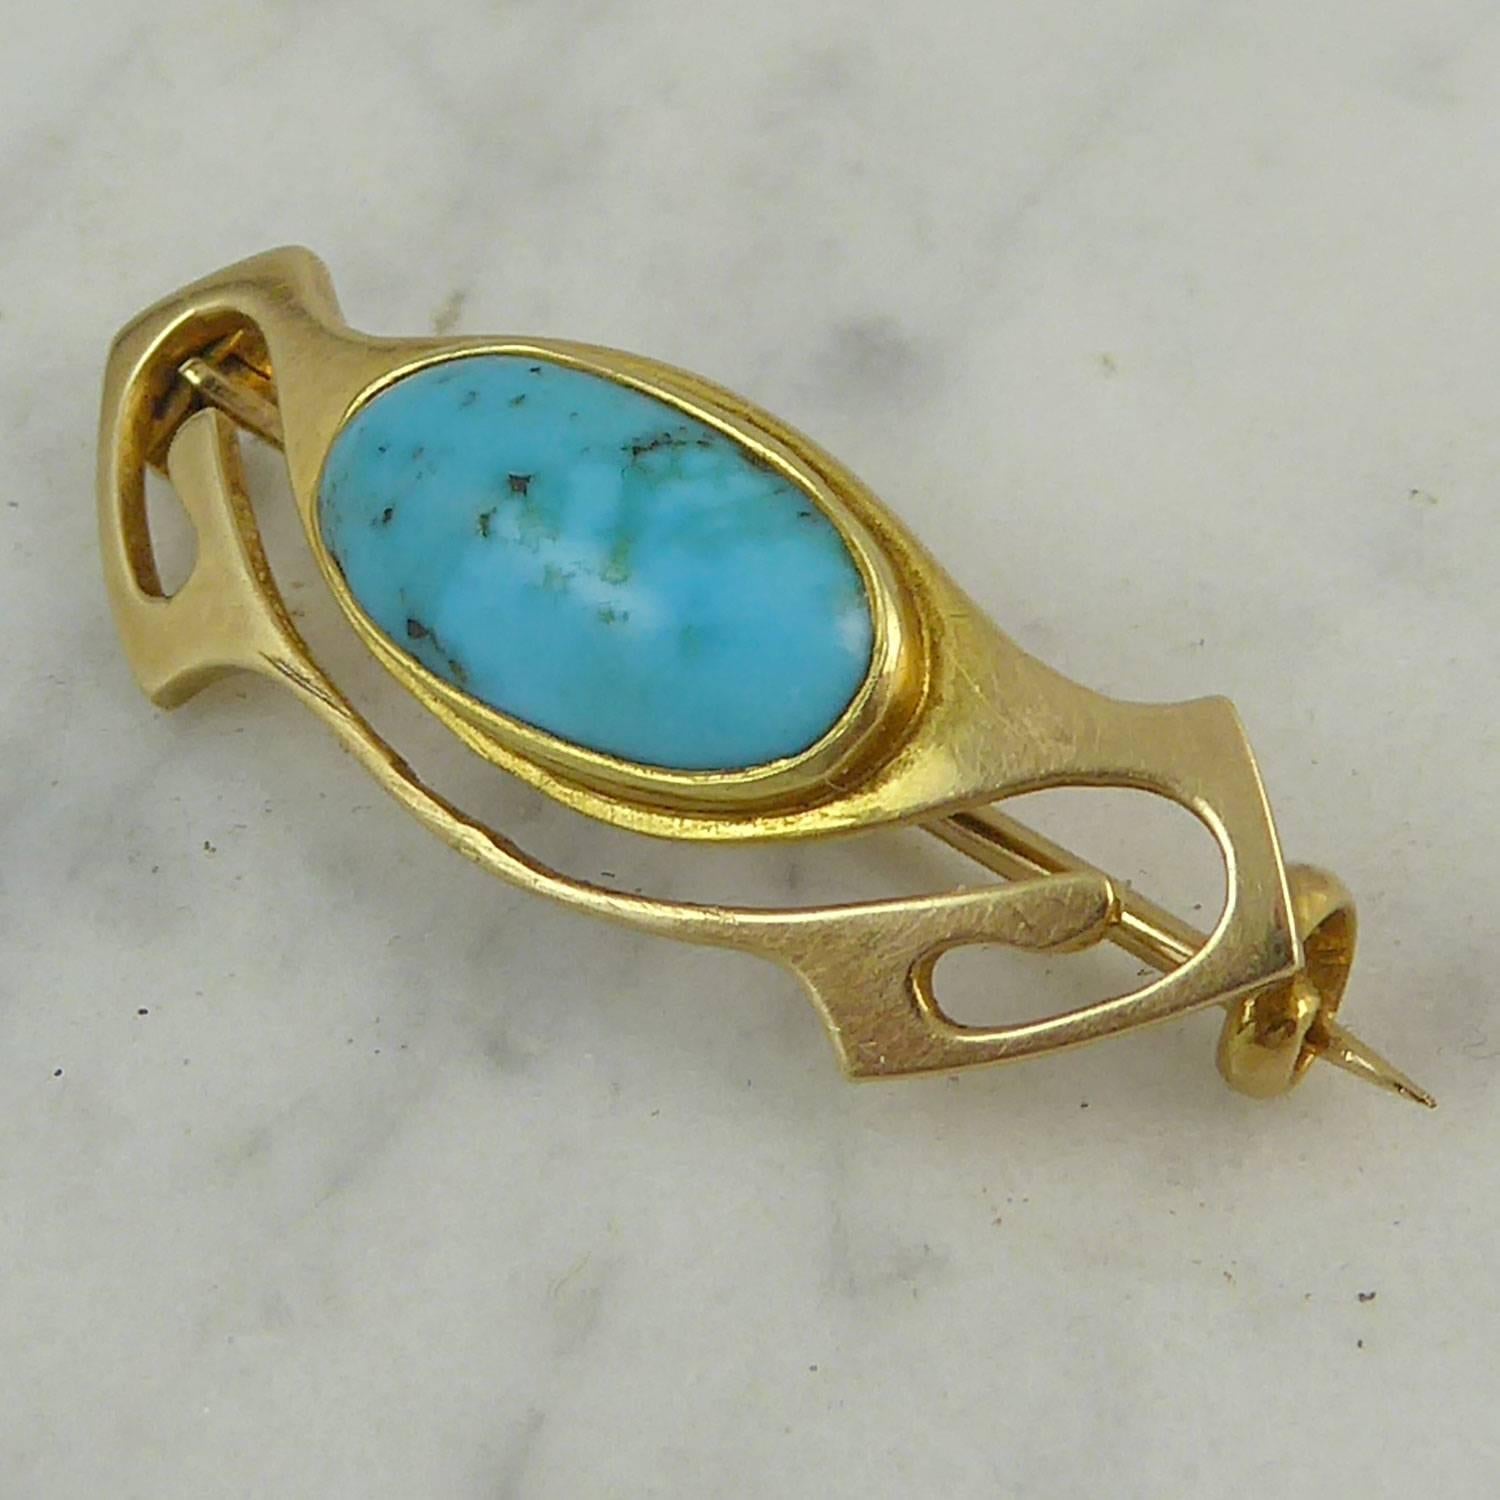 Delightful Art Nouveau brooch by the jewellery company, Murrle Bennett.  In typical Art Nouveau style and set with an oval cabochon cut turquoise in a raised surround to a yellow gold stylized plaque.  The reverse of the brooch bears the mark for